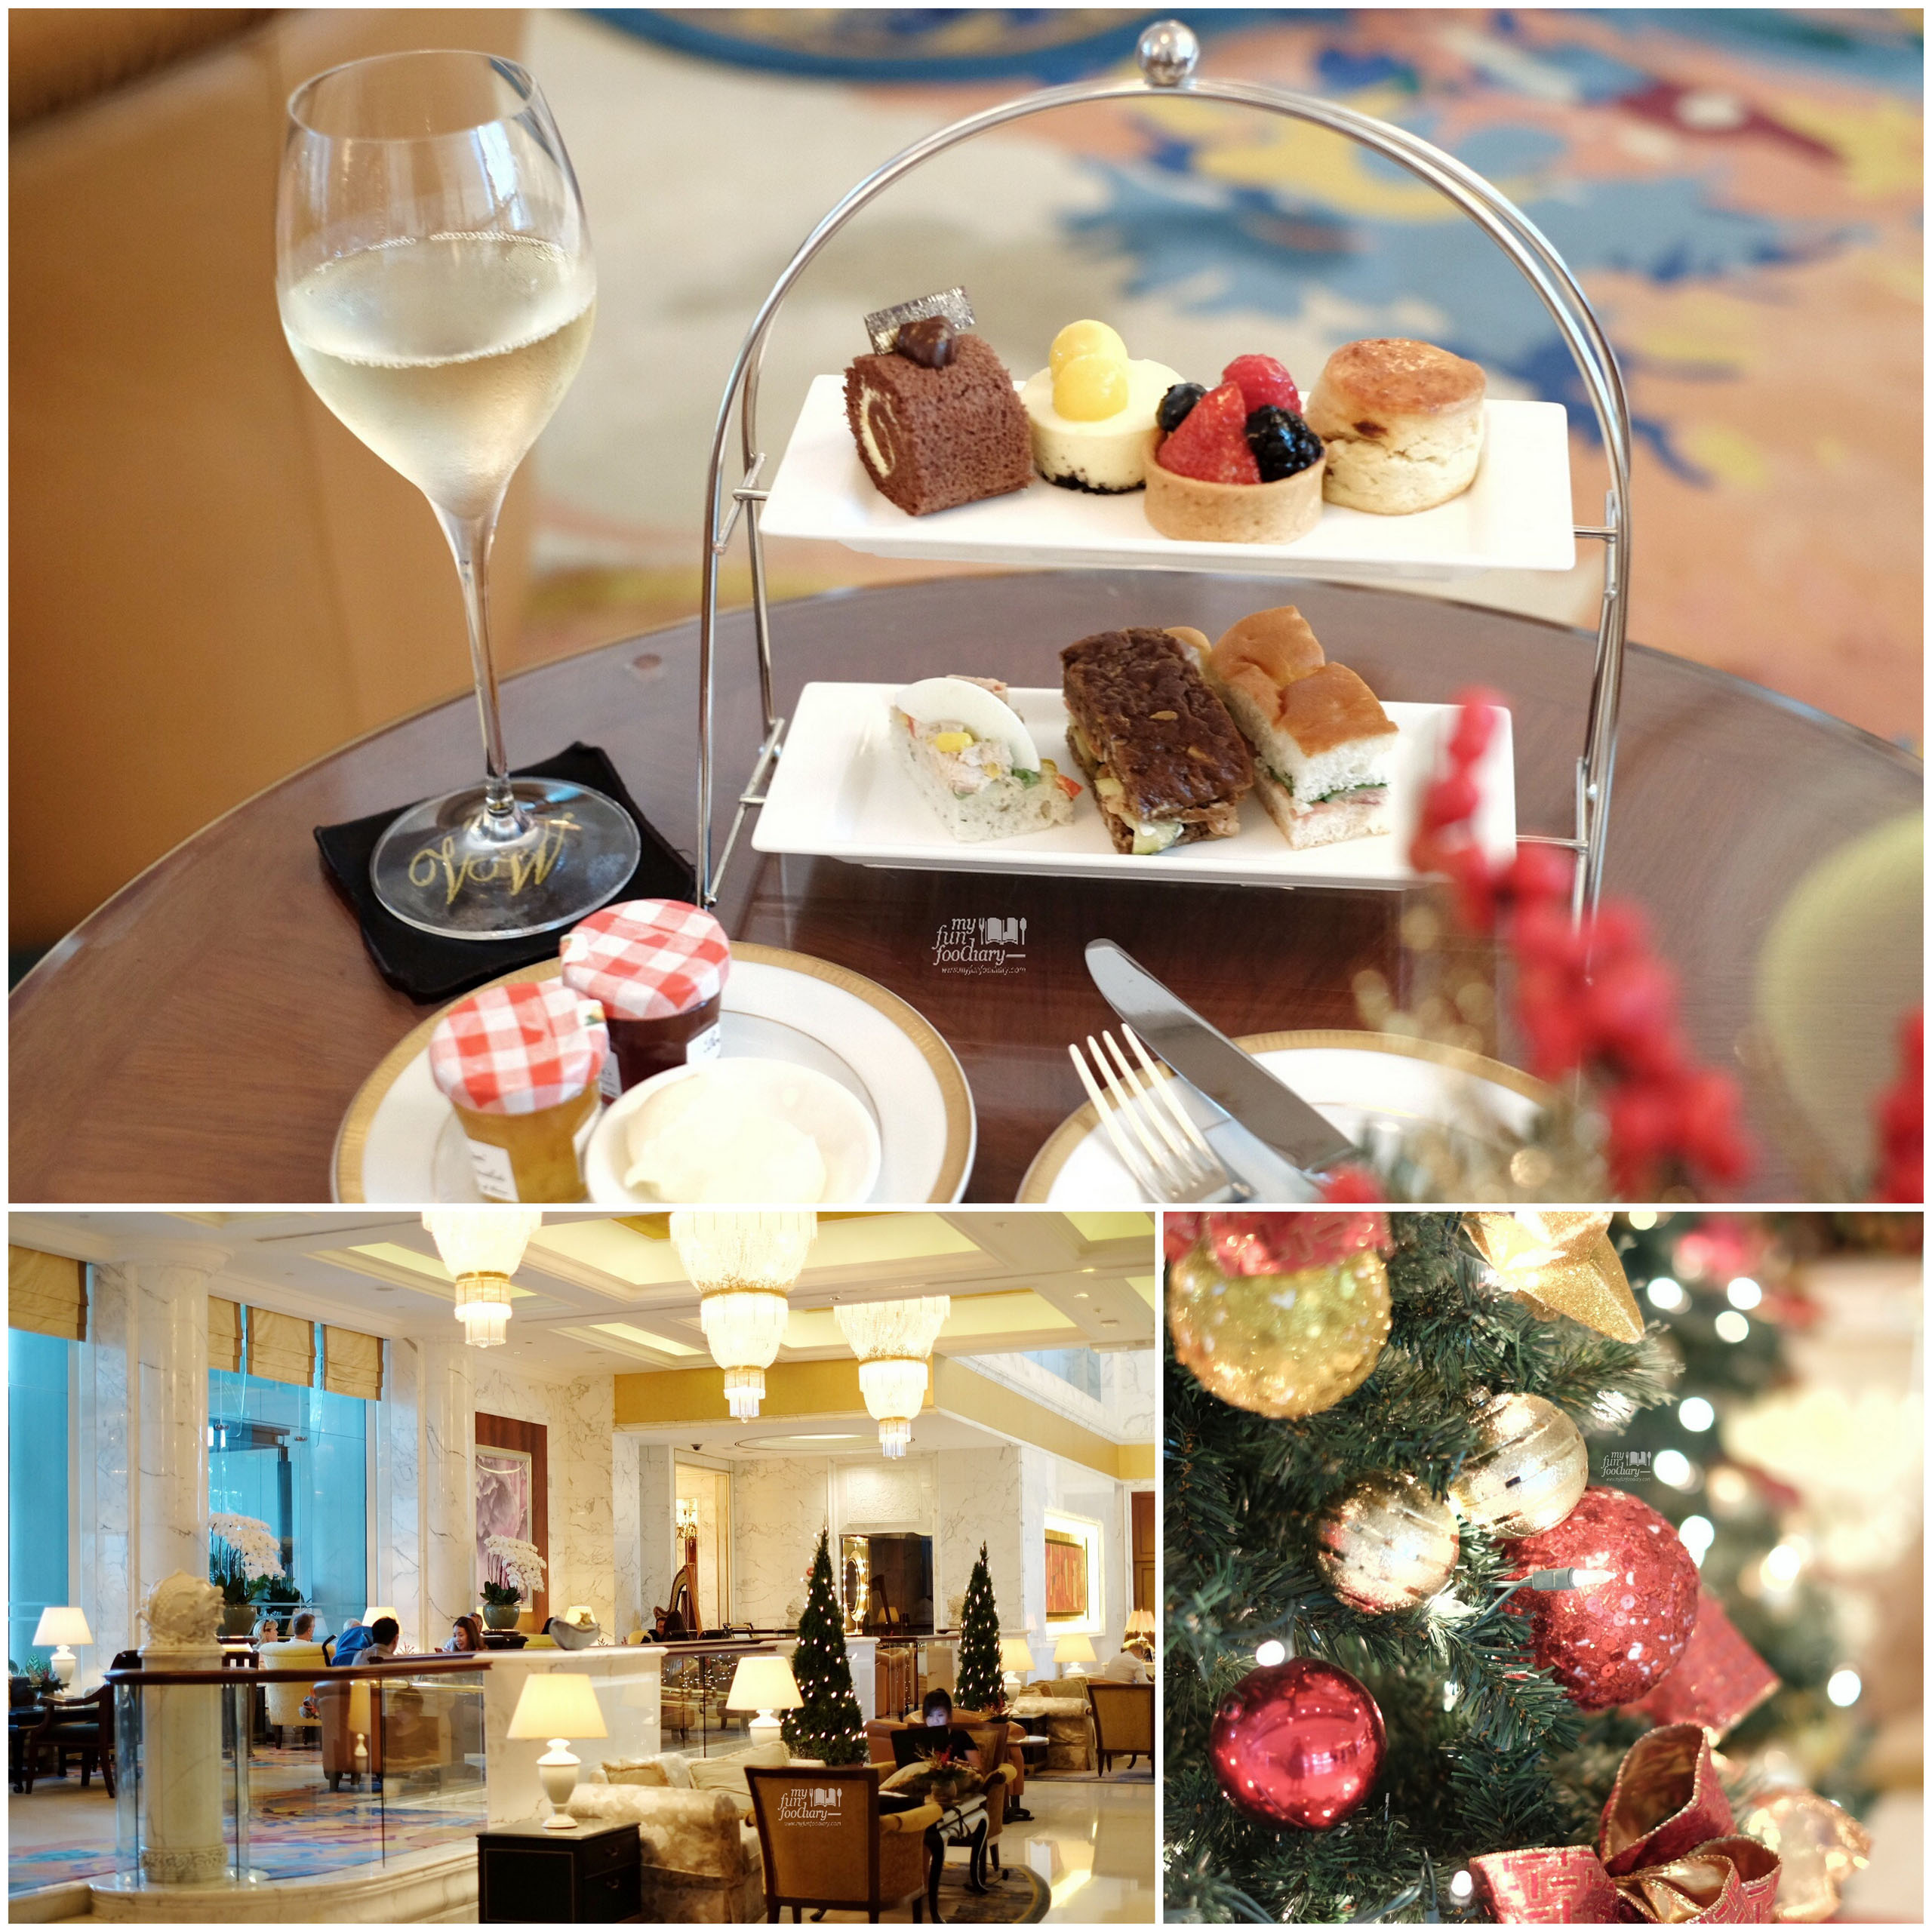 Complimentary High-Tea and Wine at Valley Wing Lobby Lounge Shangri-La Singapore by Myfunfoodiary